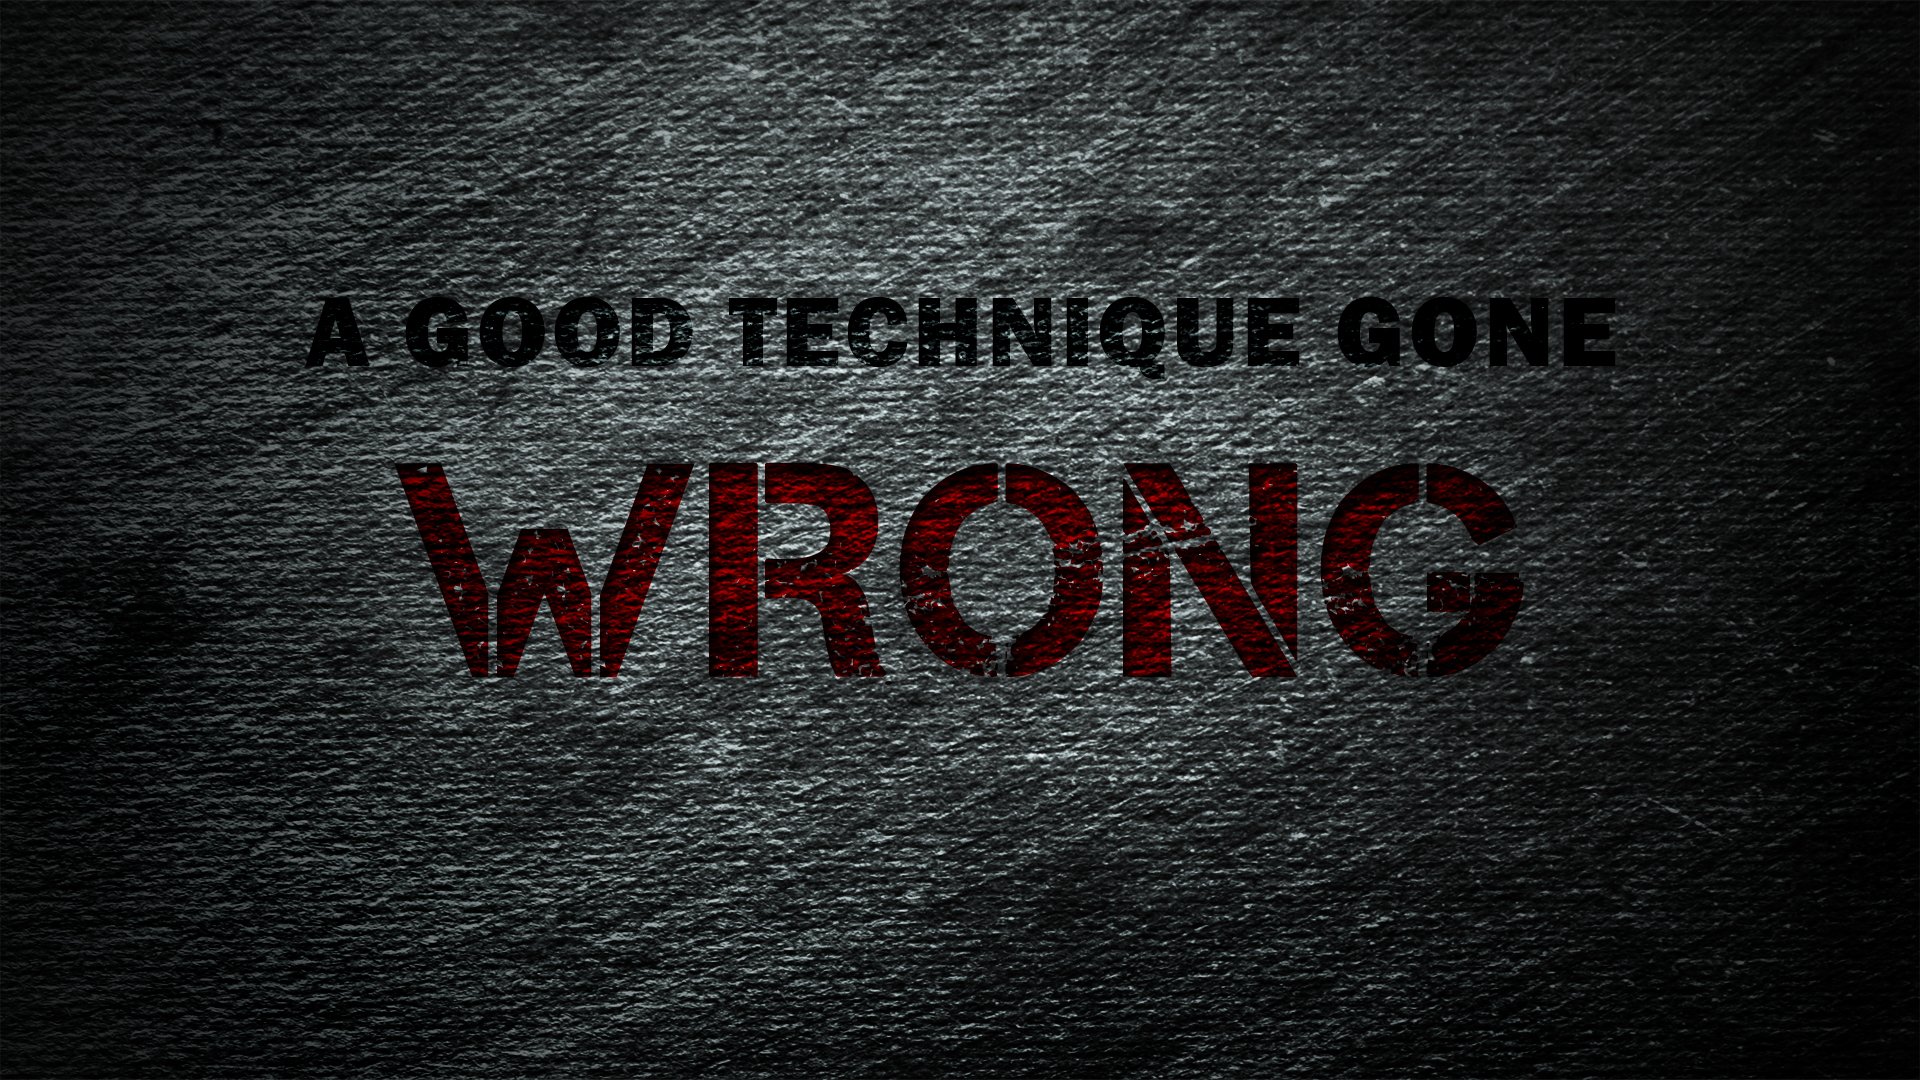 A Good Technique Gone Wrong – Blog Style Writing